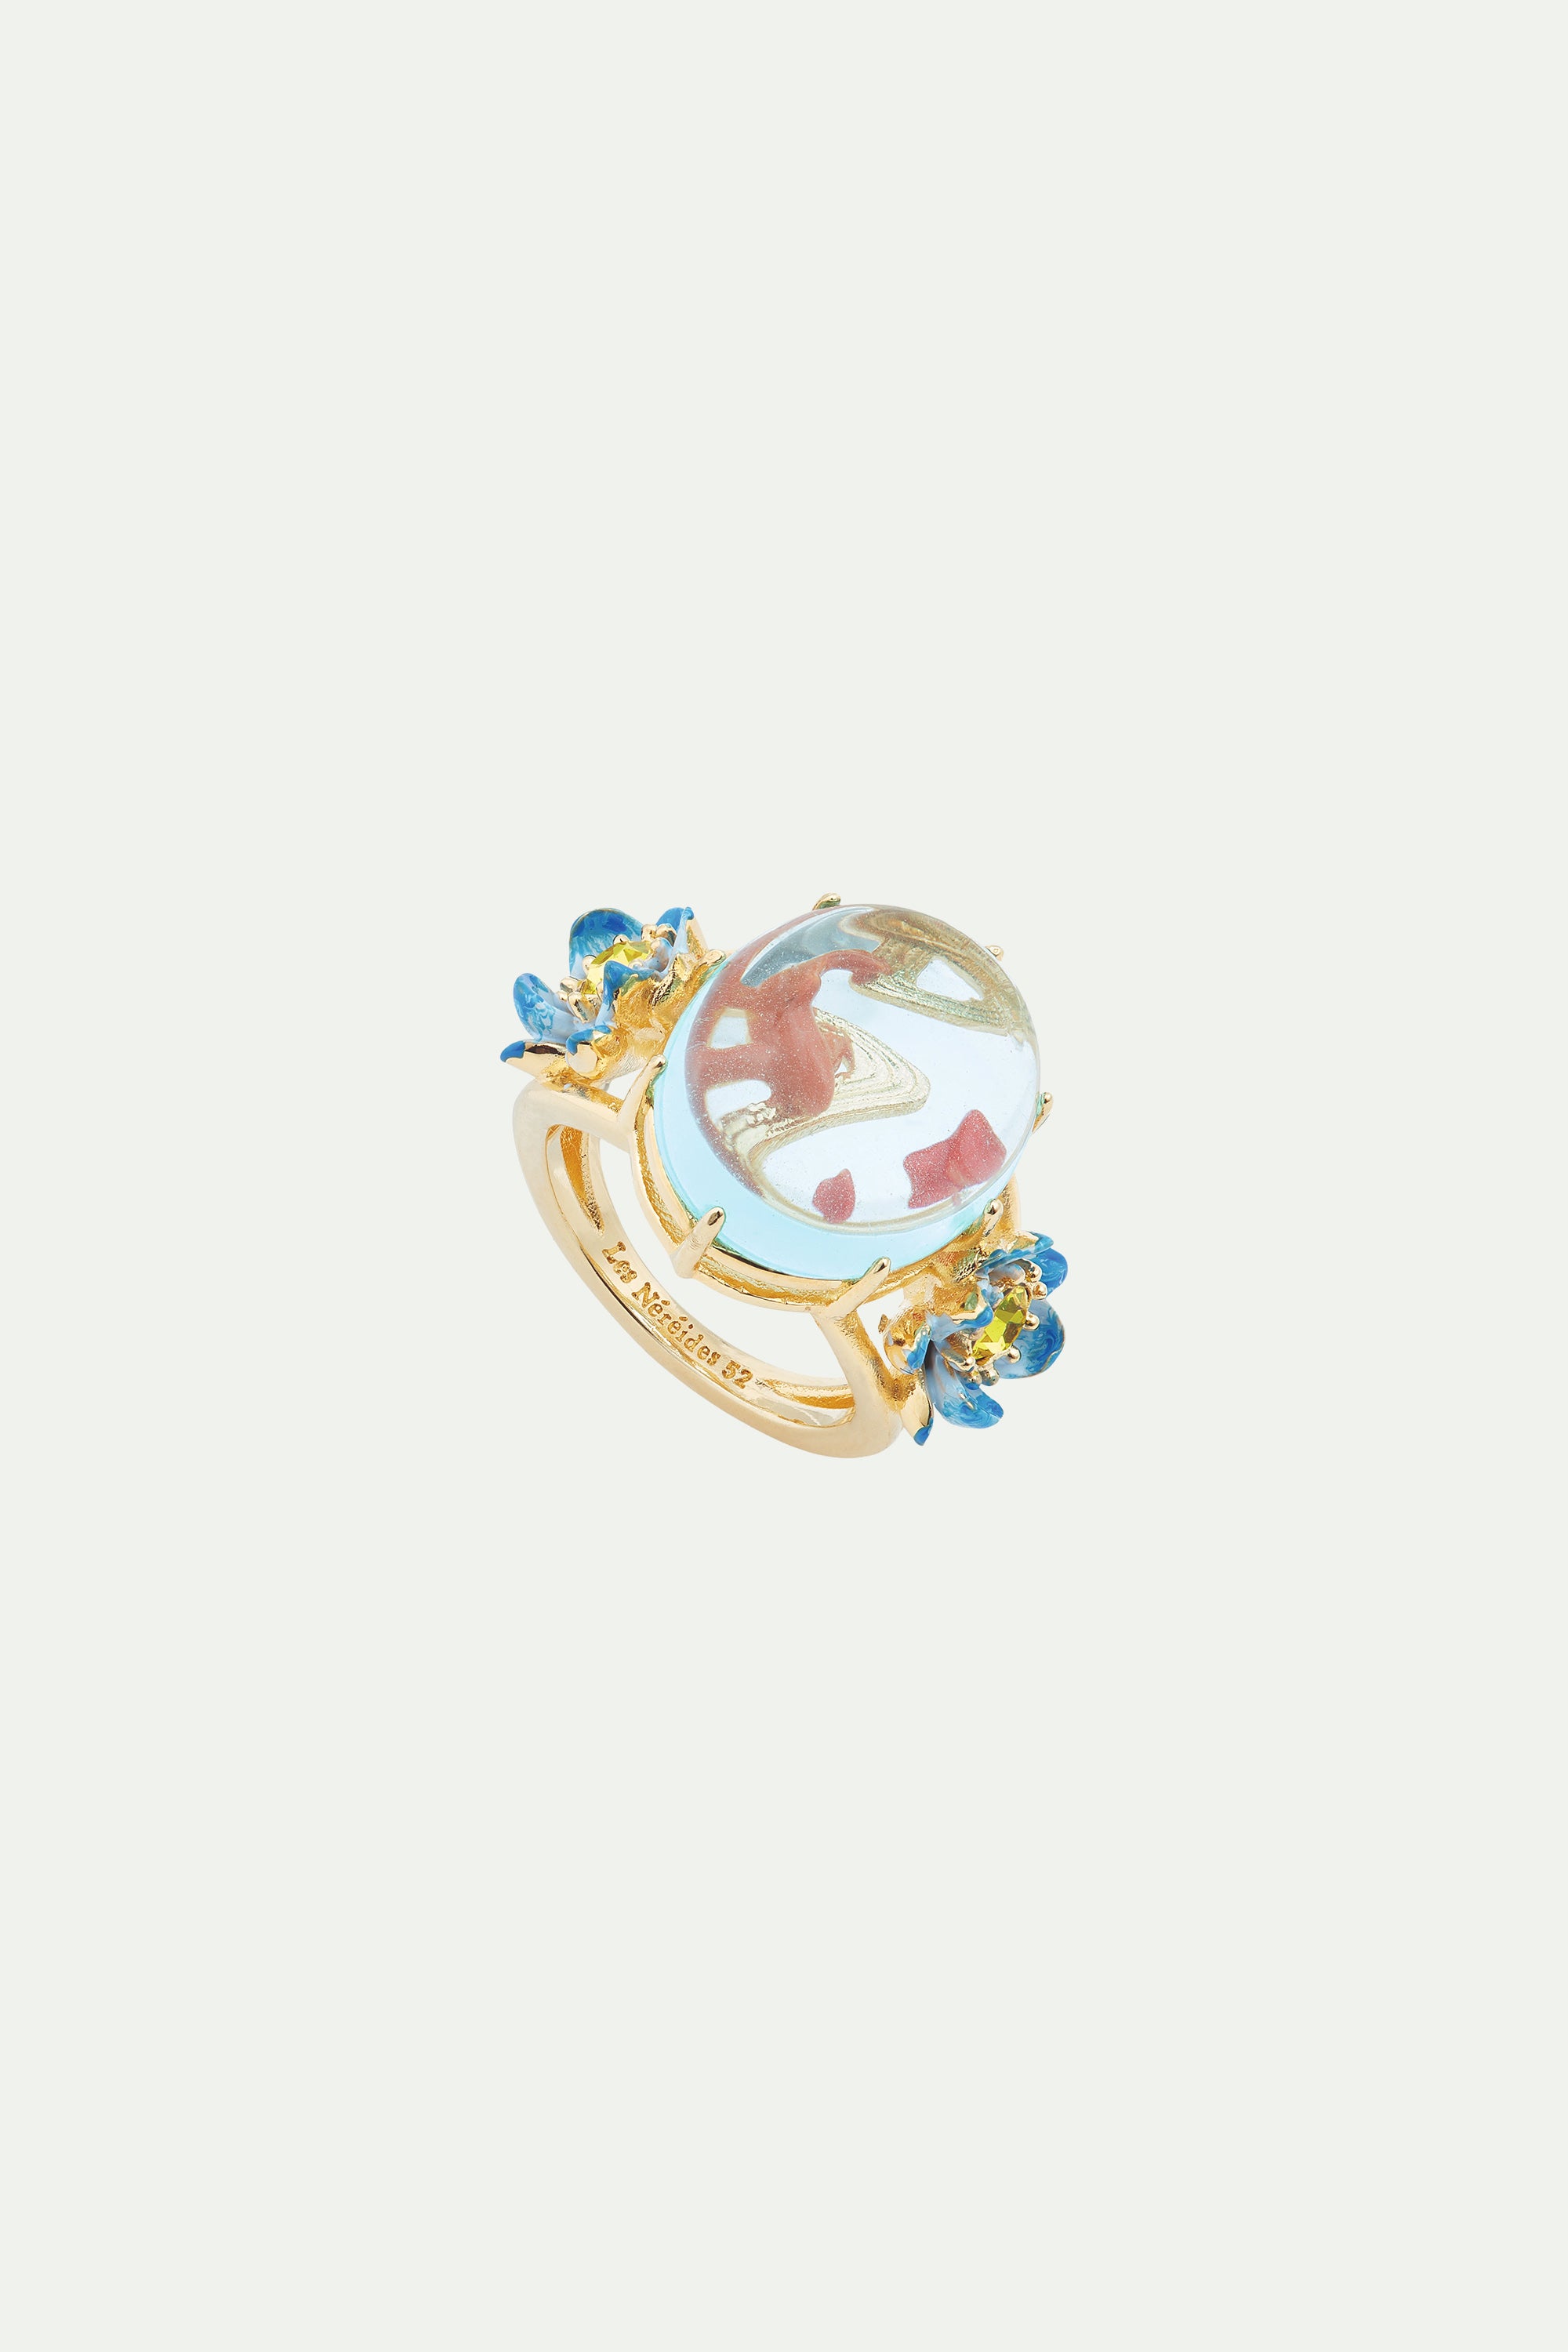 Glass oval, koi fish and blue lotus cocktail ring